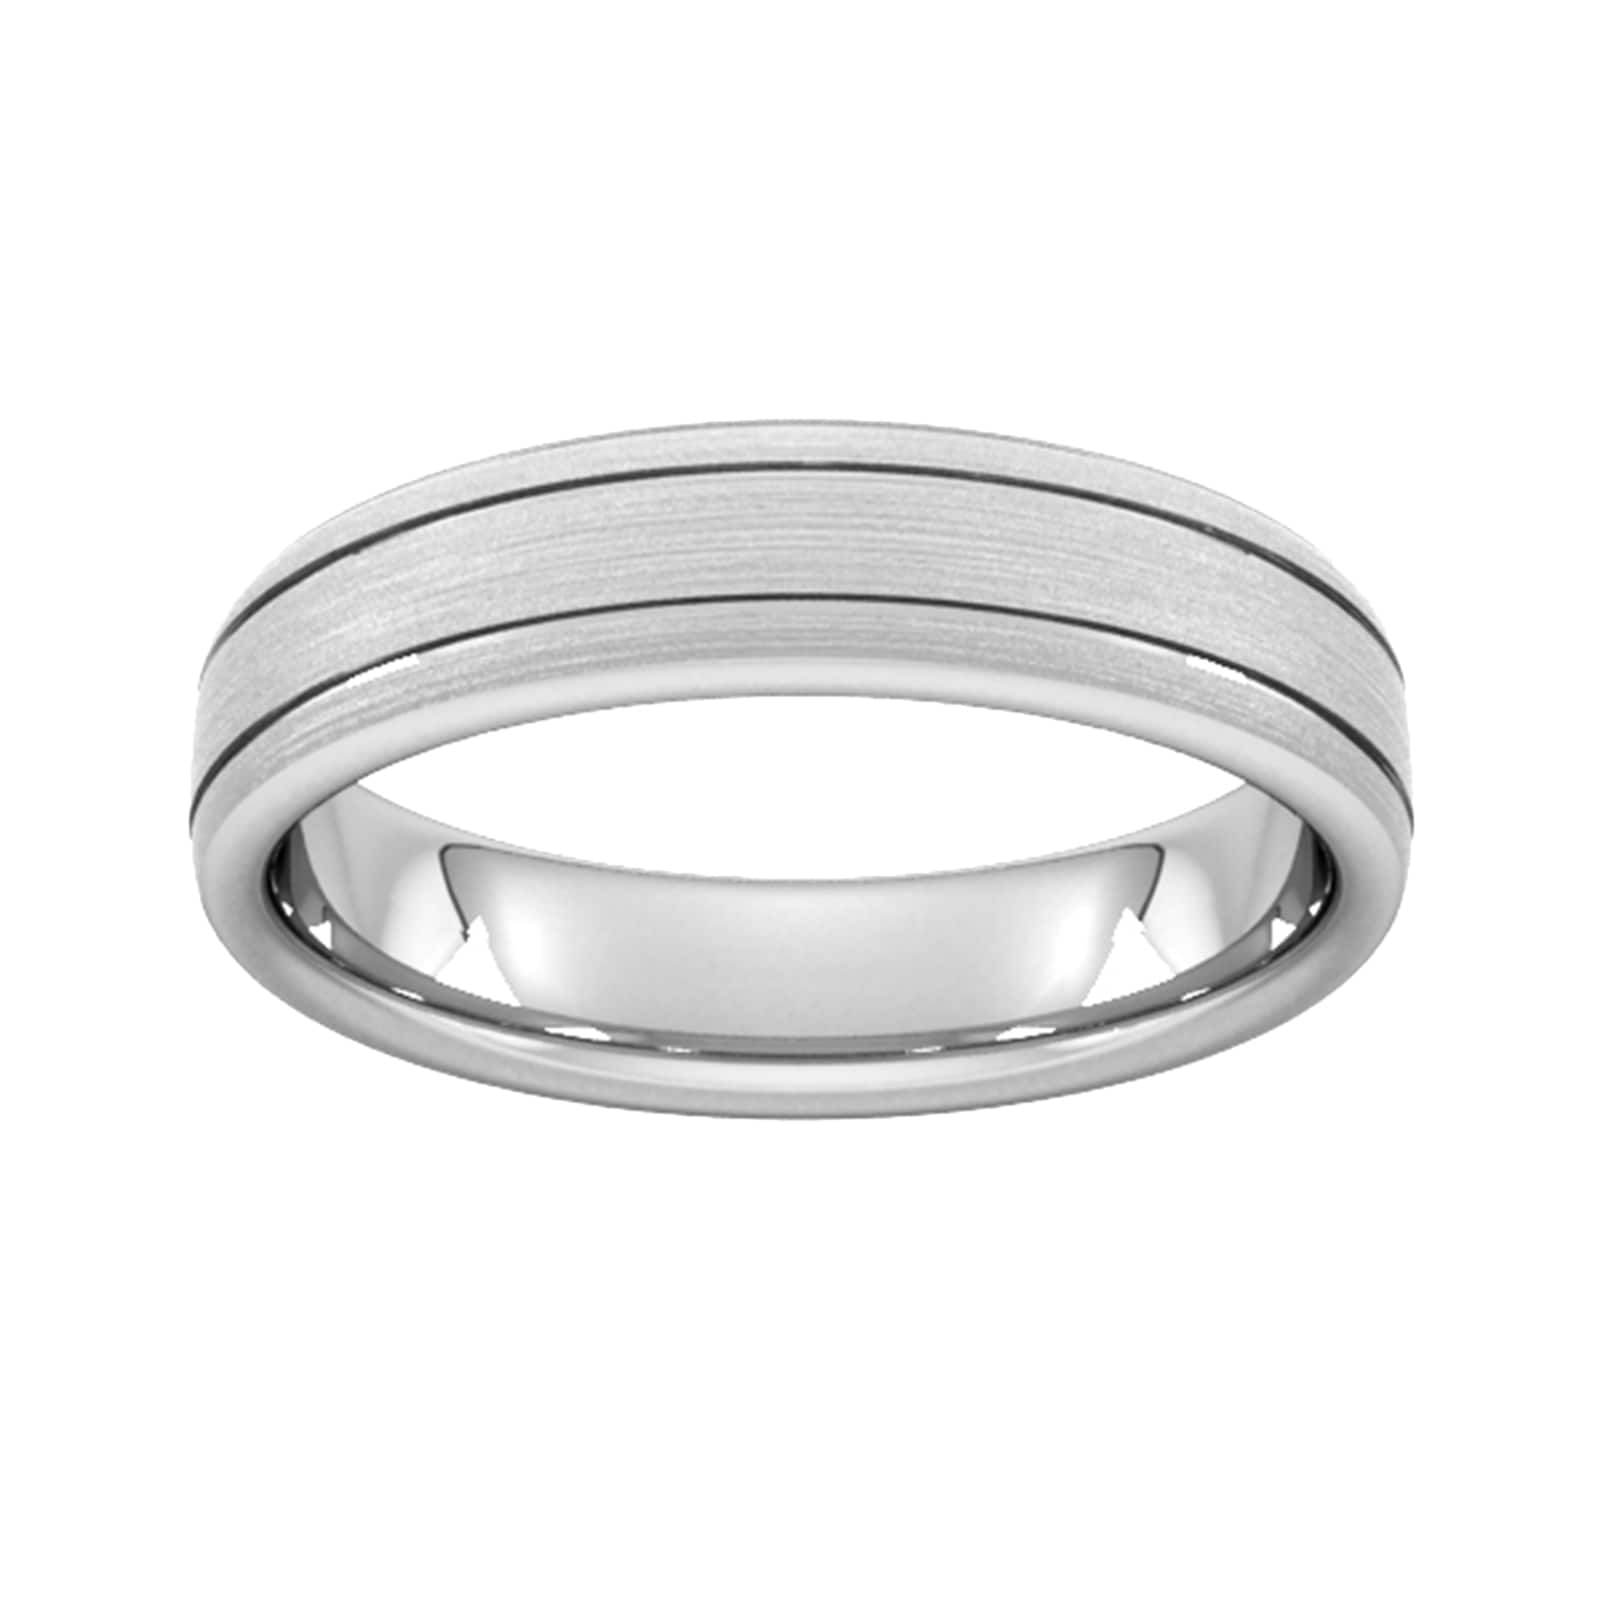 5mm D Shape Heavy Matt Finish With Double Grooves Wedding Ring In 9 Carat White Gold - Ring Size V